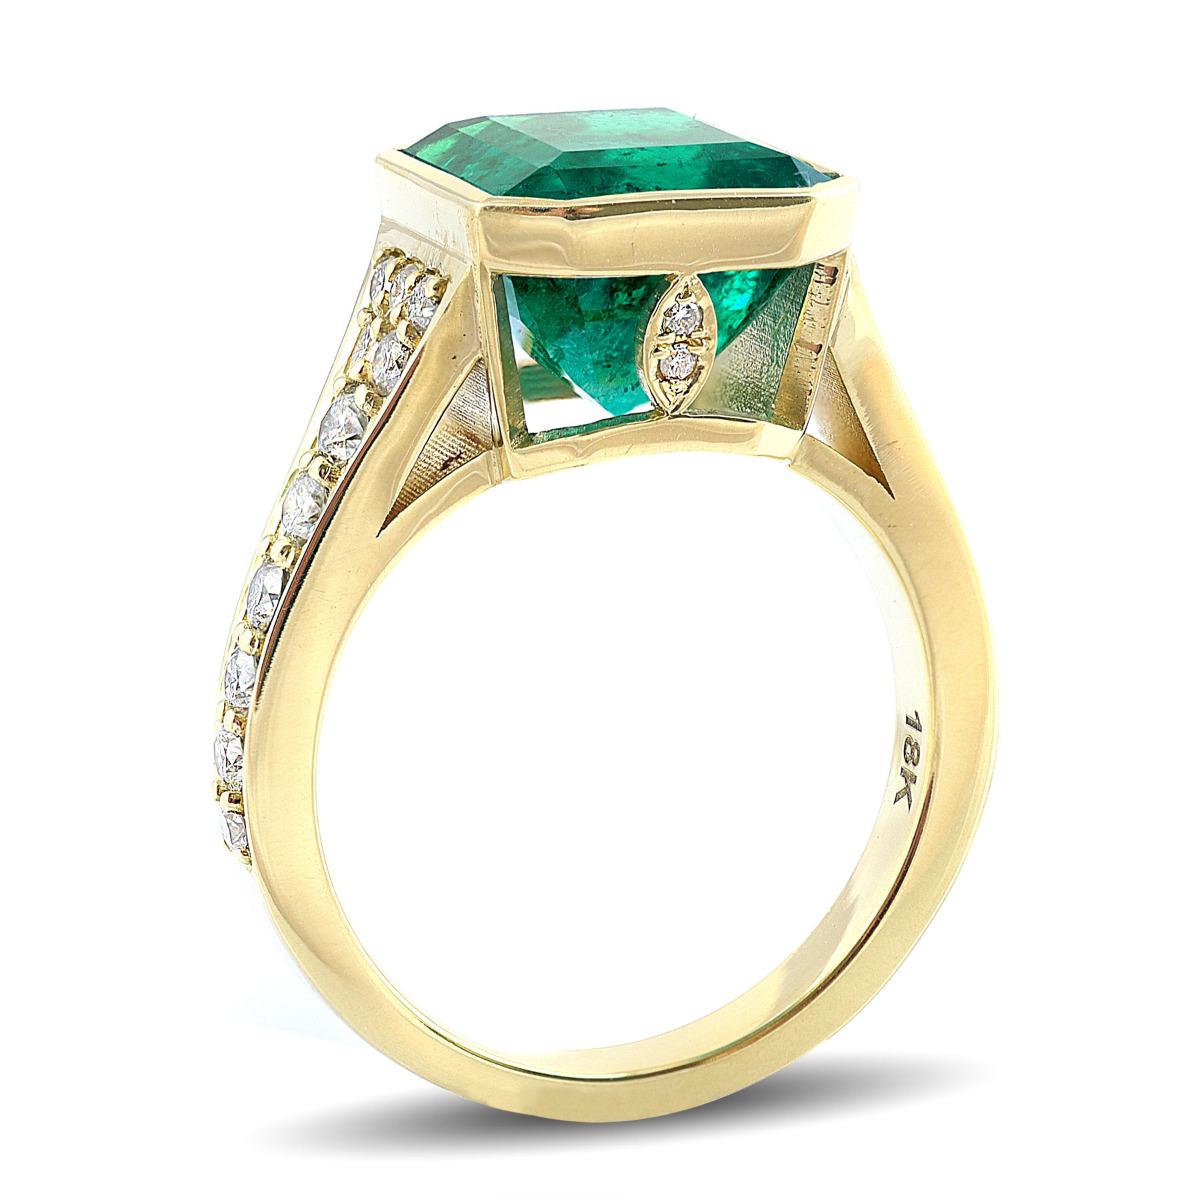 Emerald Cut GIA Certified 5.54 Carats Colombian Emerald Diamonds set in 18K Yellow Gold Ring For Sale